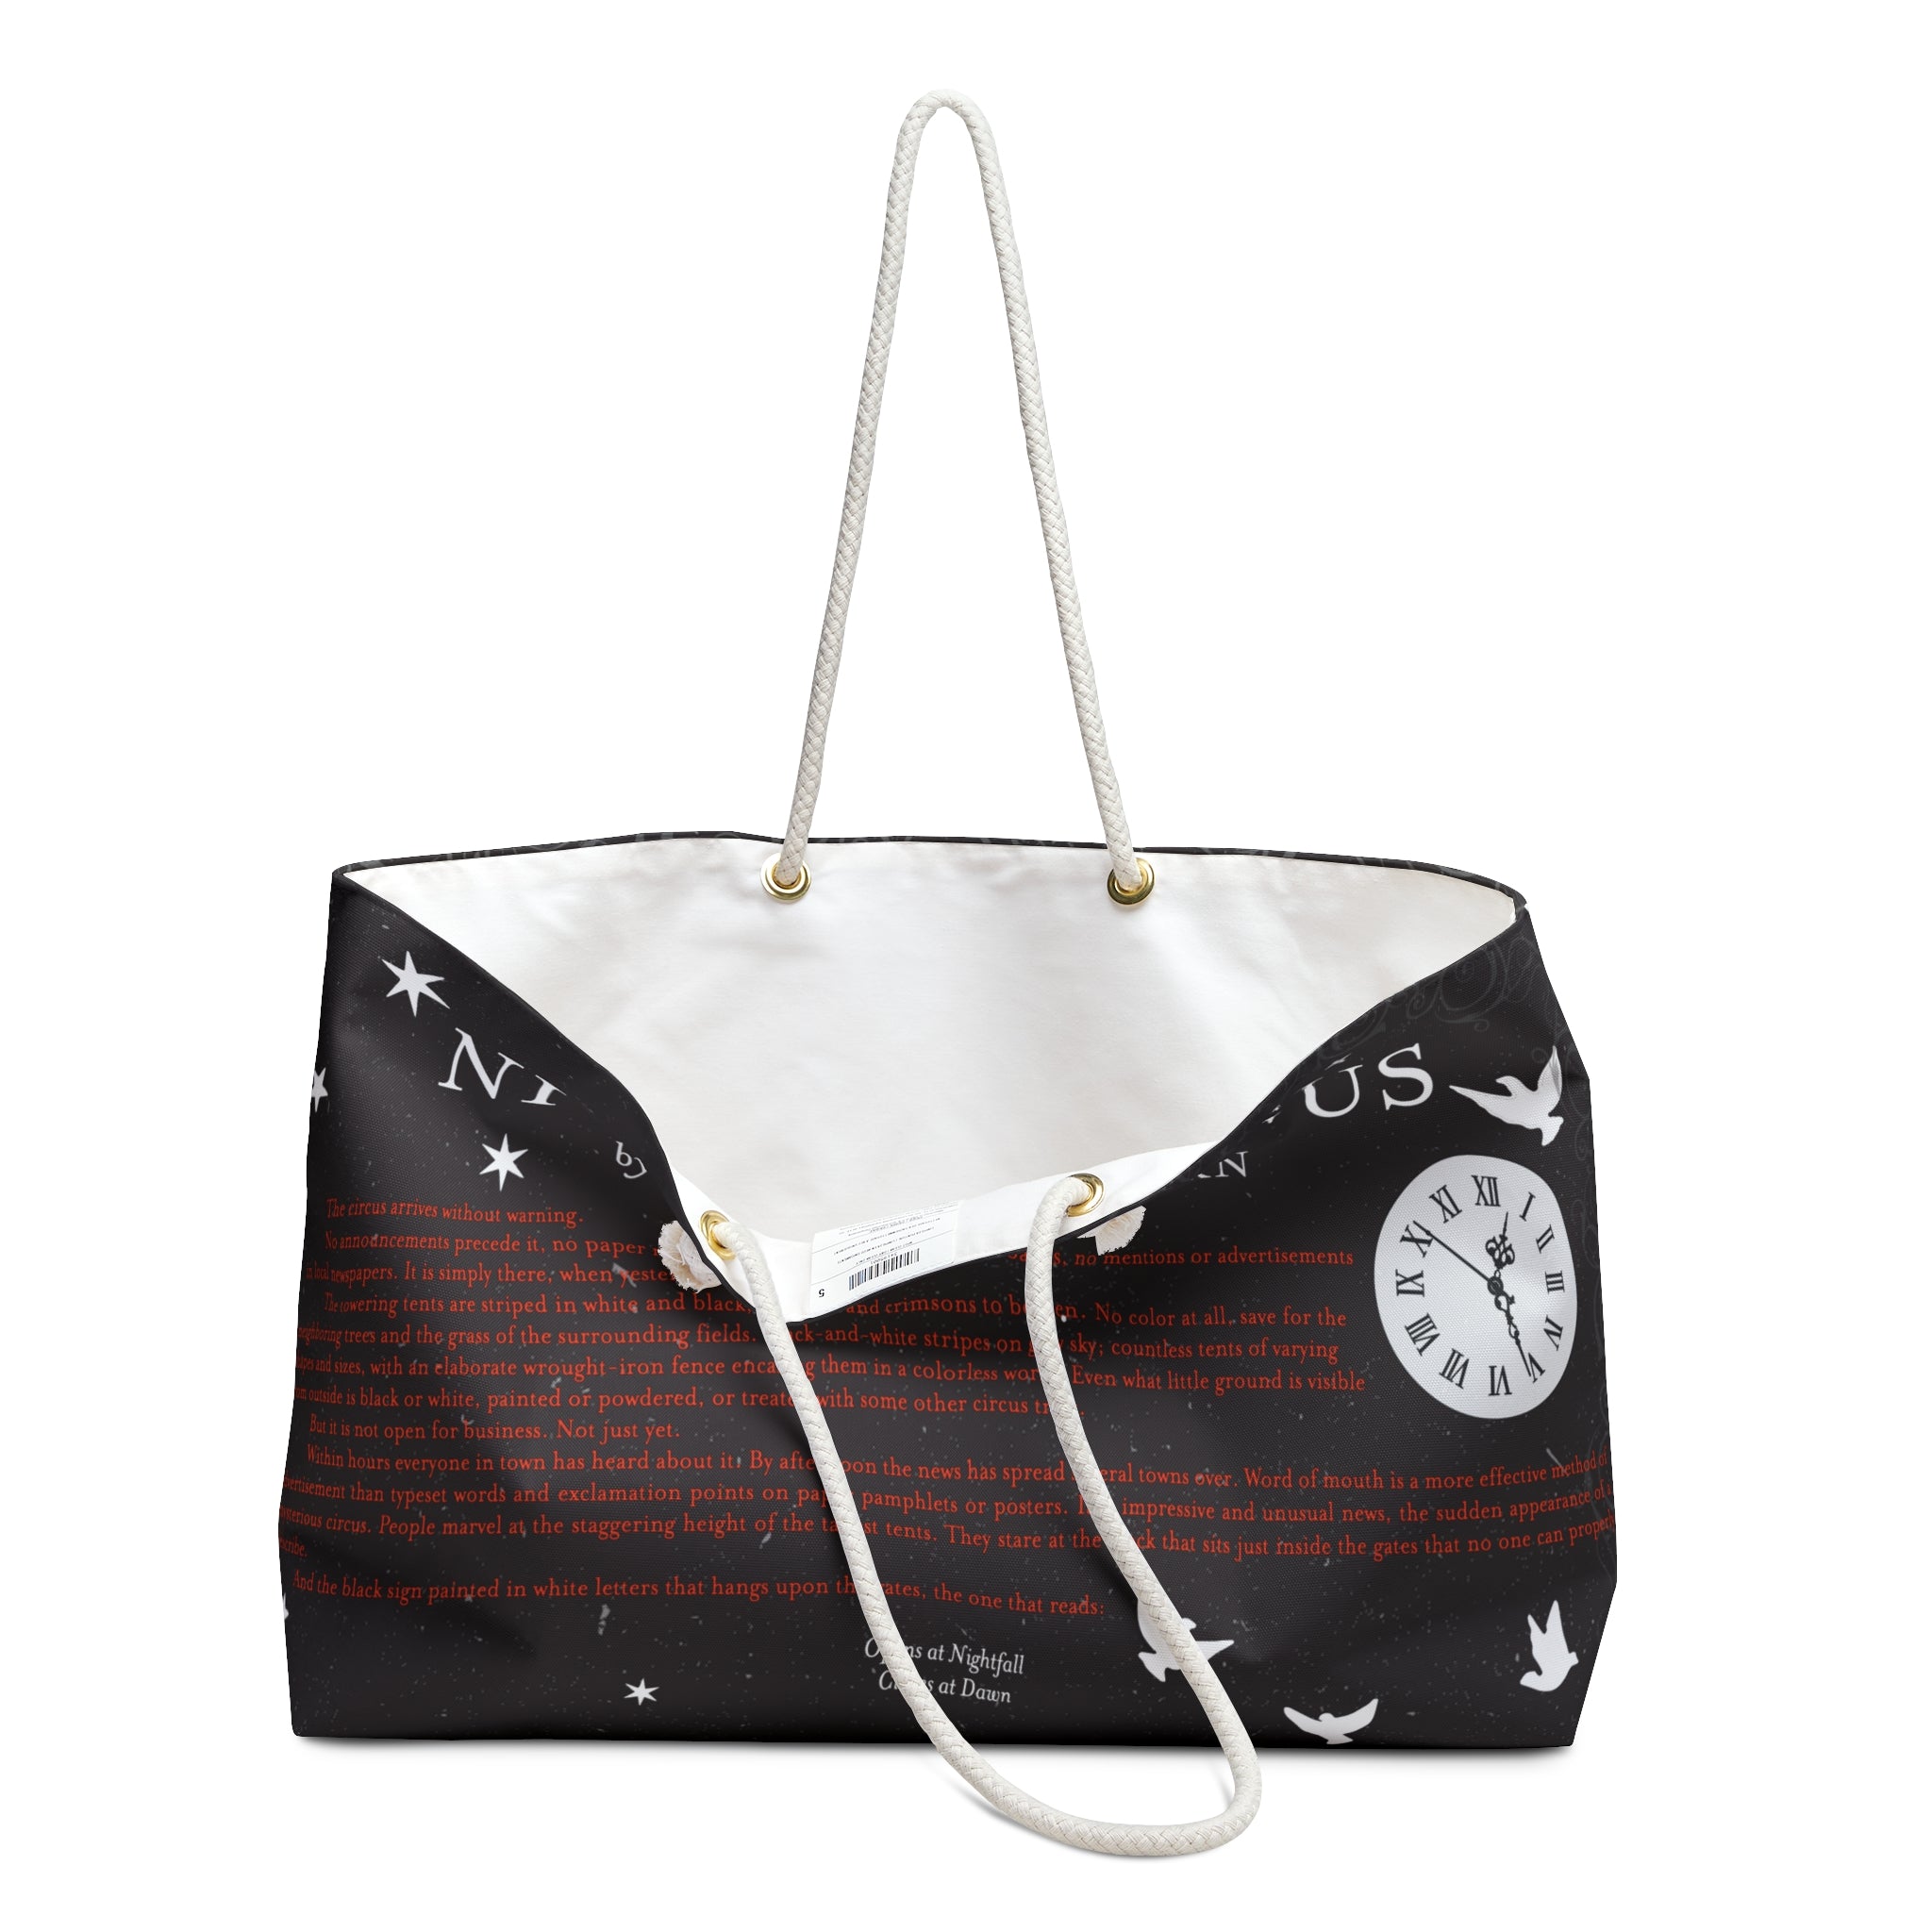 Breaking Through Tote - LIMITED EDITION – Take Back The Night